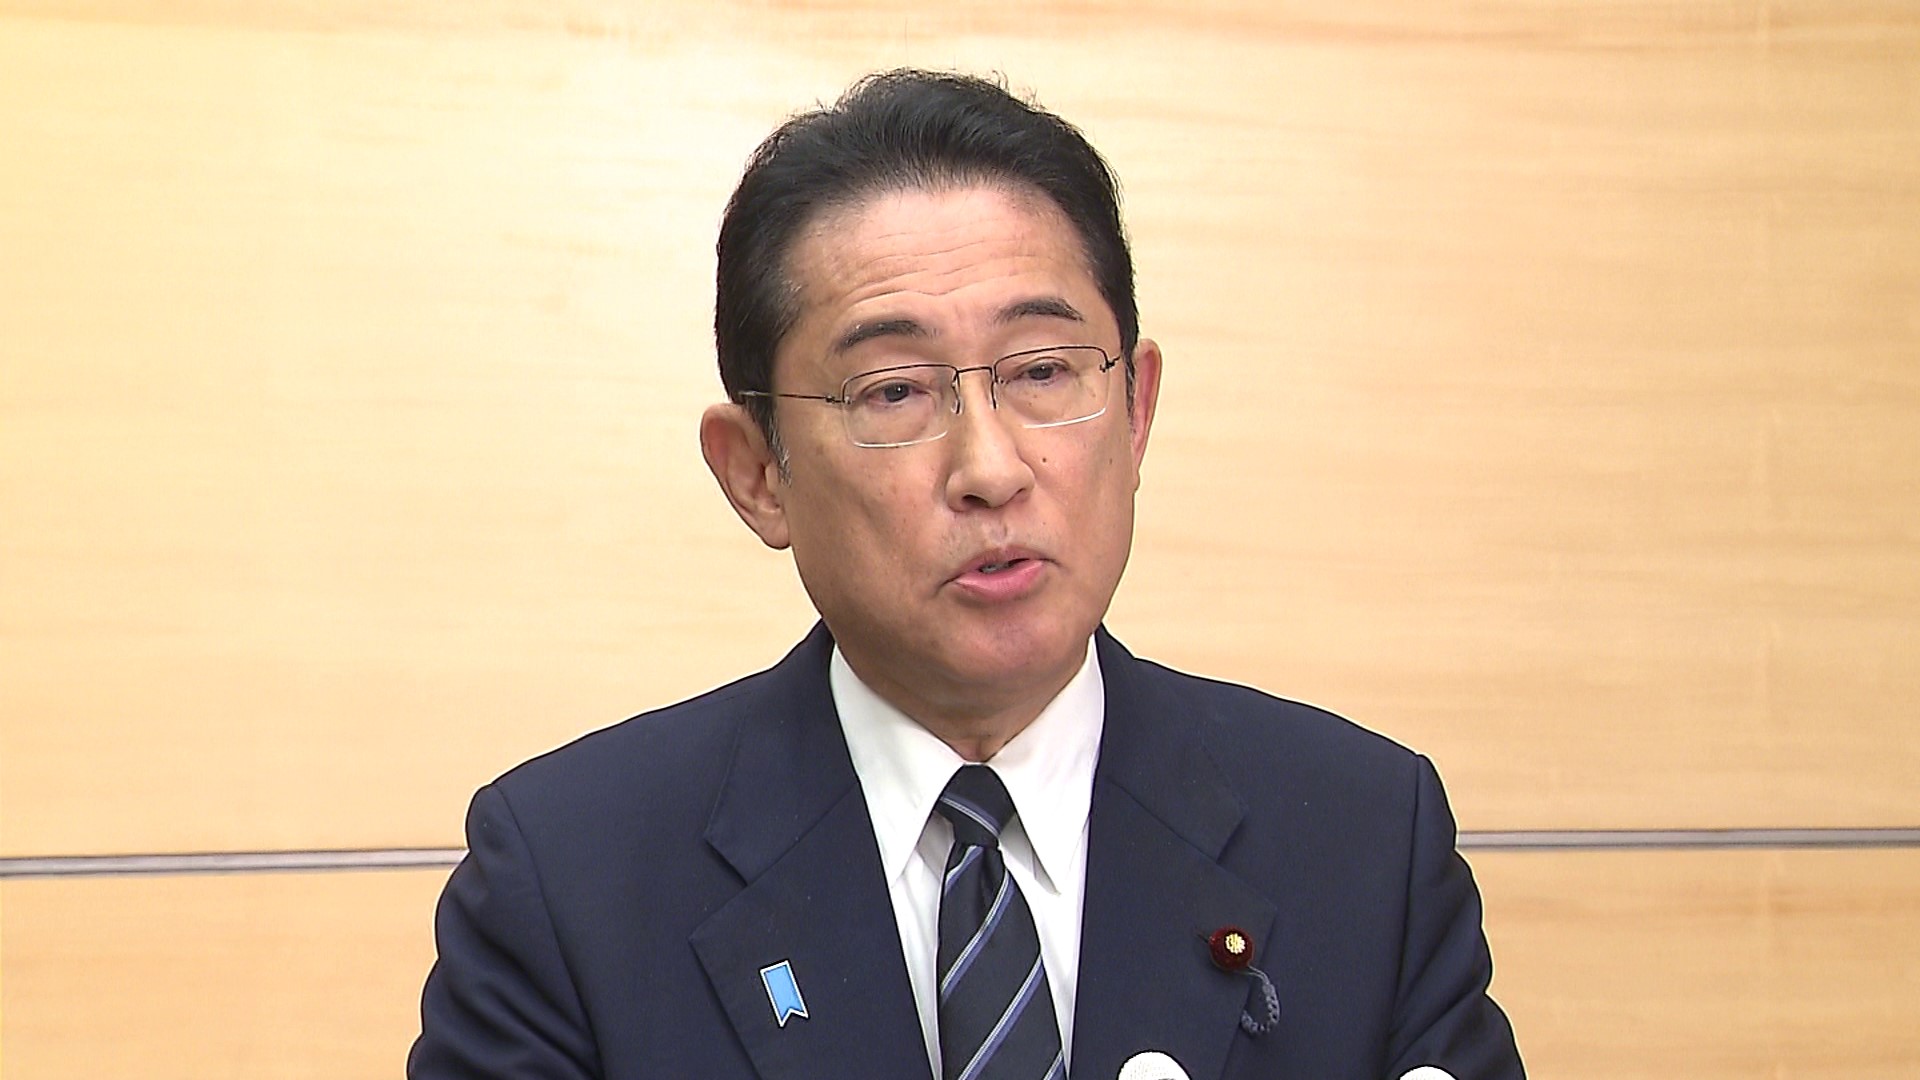 Prime Minister Kishida answering questions from the journalists